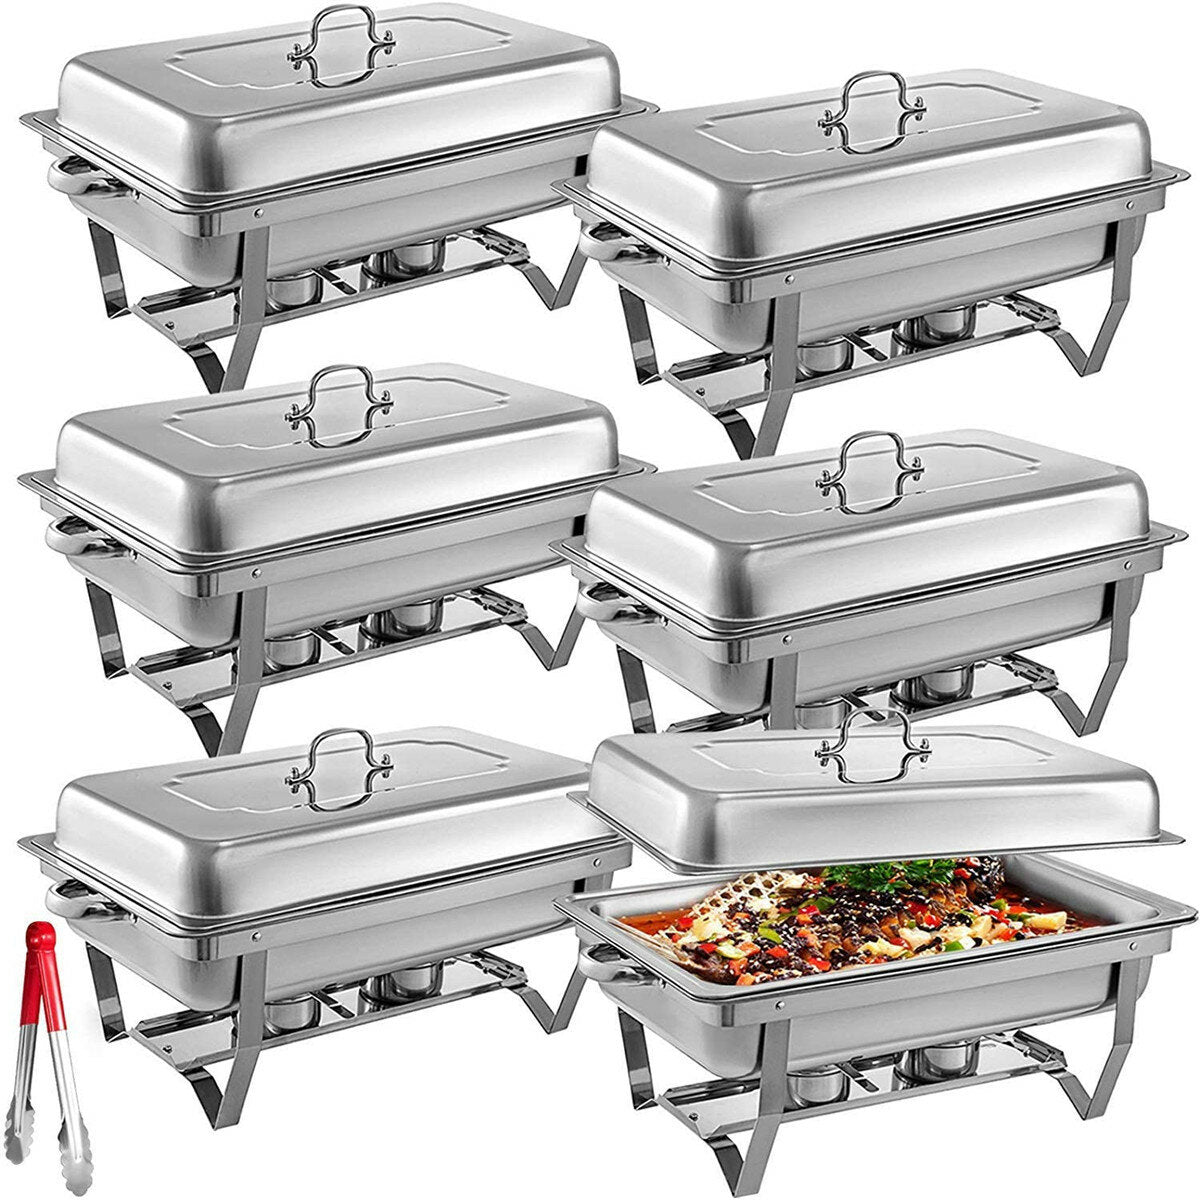 Folding Buffet Stove Stainless Steel Chafing Dish Food Warmer for Kitchen